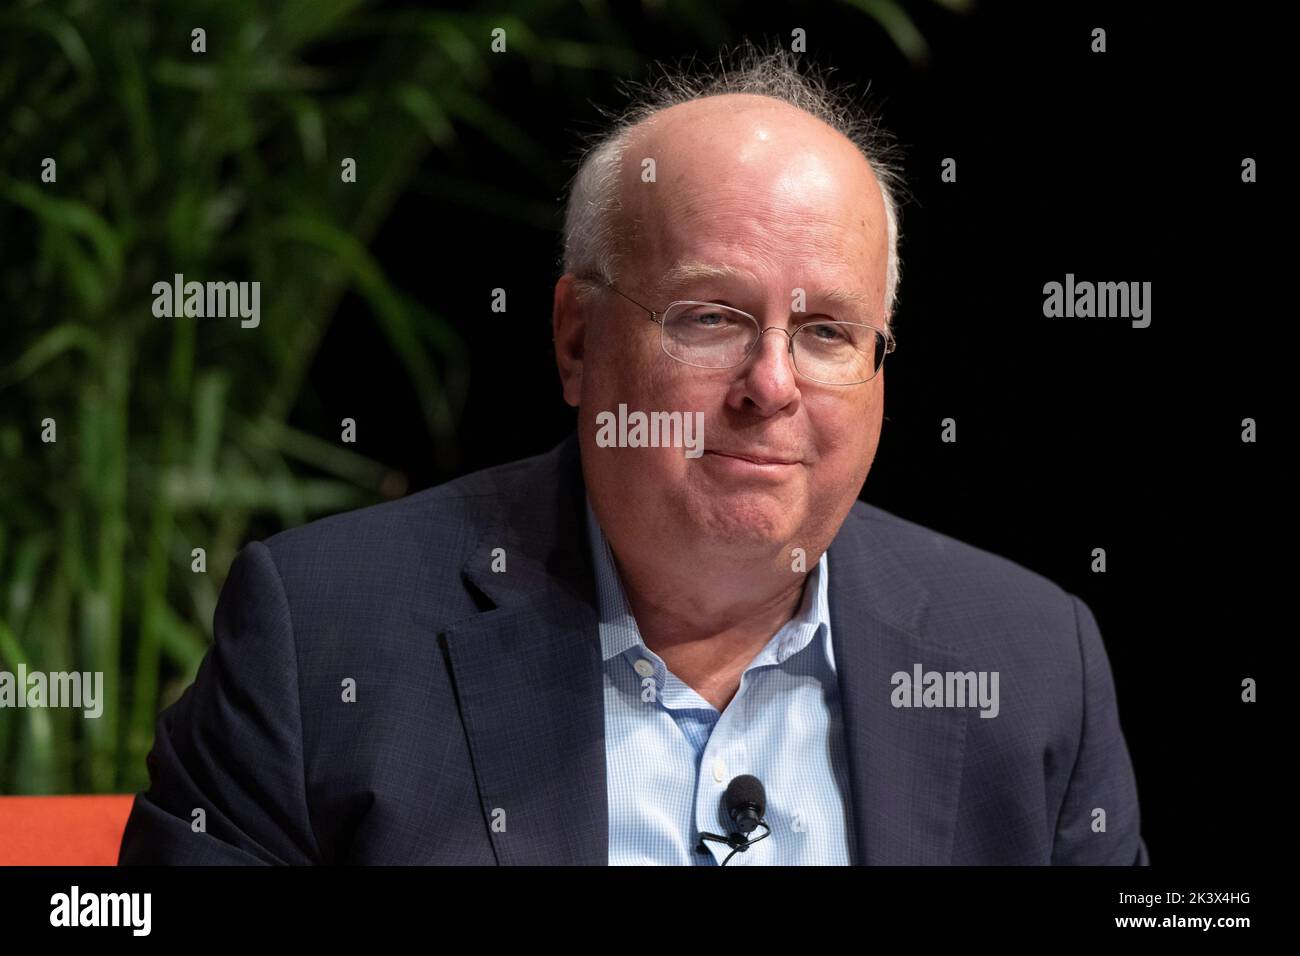 Republican political strategist KARL ROVE analyzes the upcoming midterm elections during an interview session at the annual Texas Tribune Festival in downtown Austin on September 24, 2022.  Rove is a former White House deputy chief of staff in the Bush administration. Stock Photo